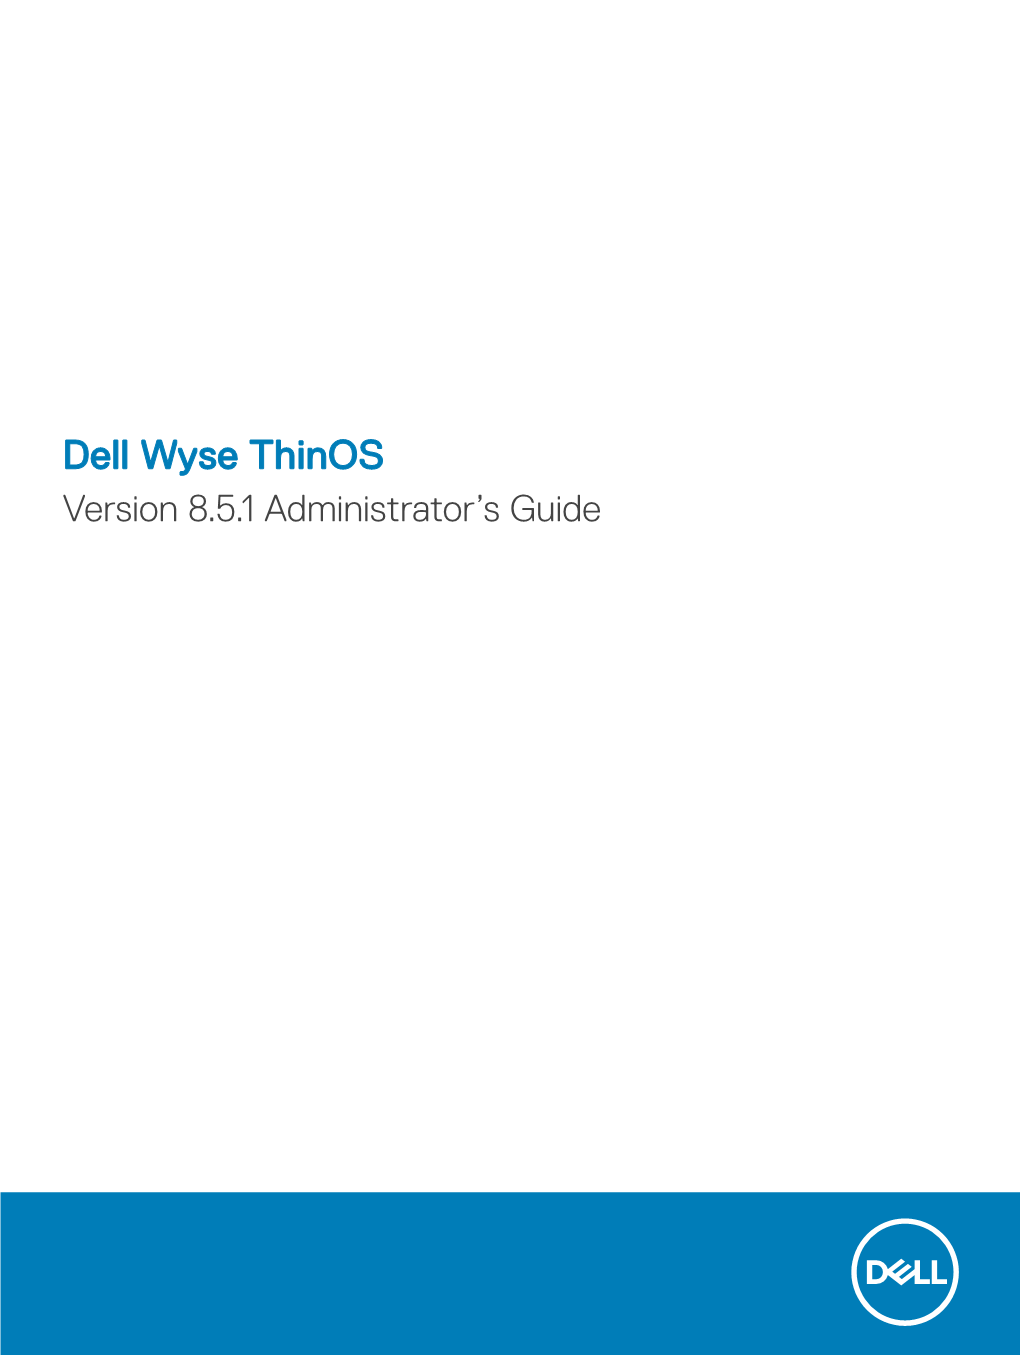 Dell Wyse Thinos Version 8.5.1 Administrator's Guide